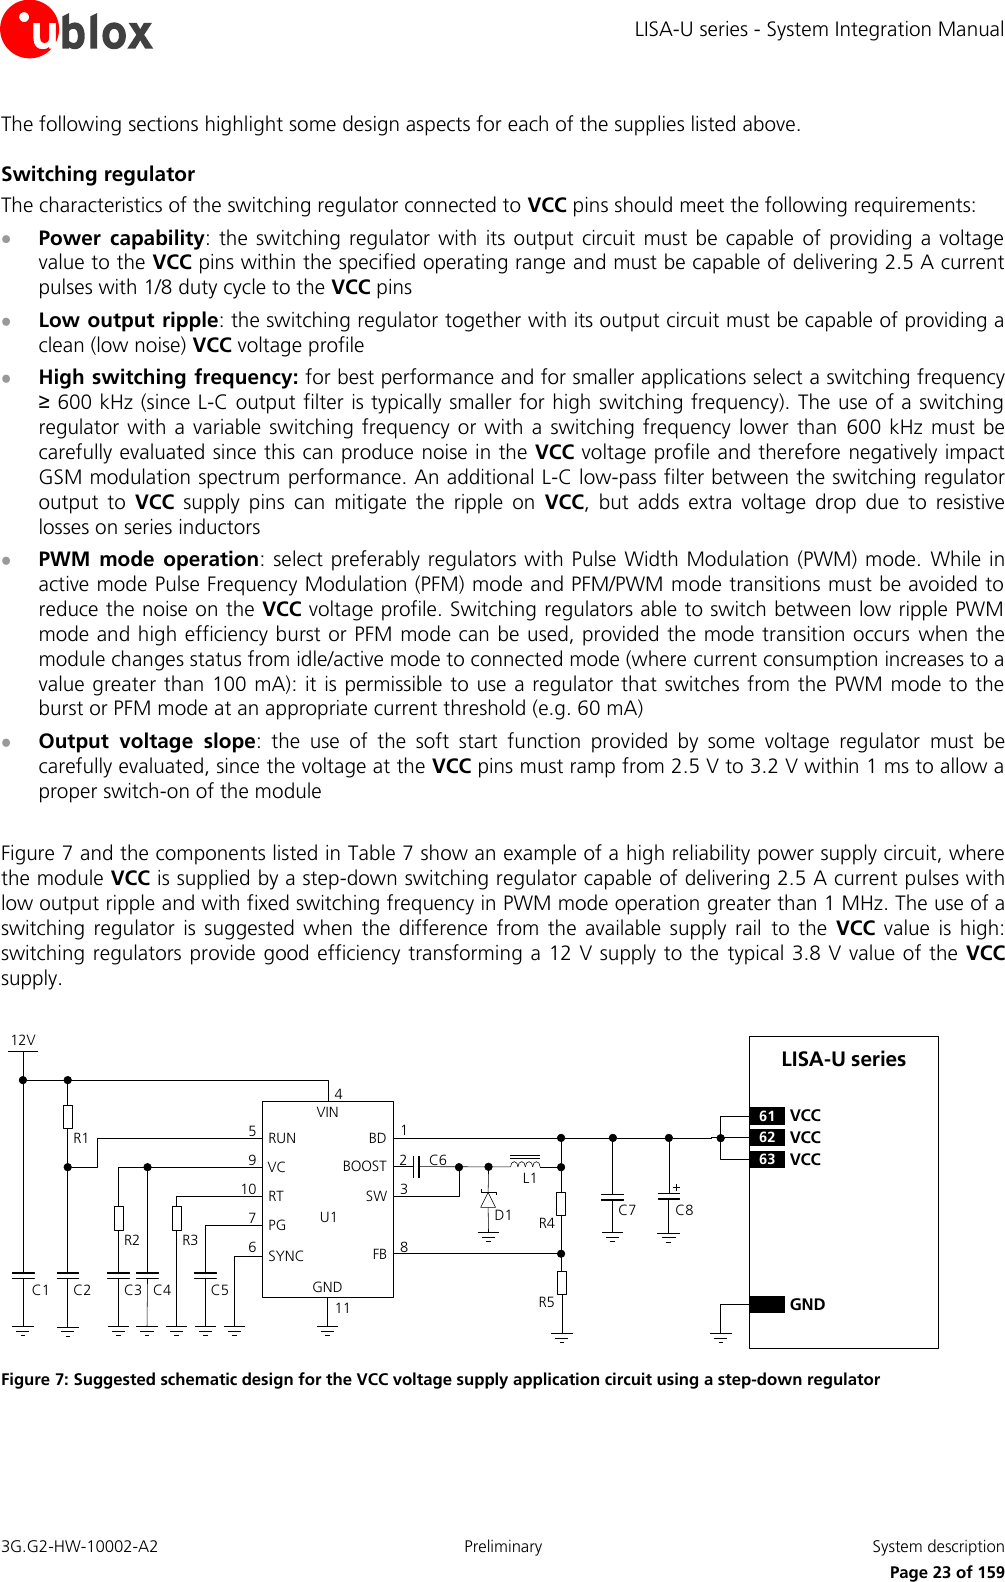 LISA-U series - System Integration Manual 3G.G2-HW-10002-A2  Preliminary  System description      Page 23 of 159 The following sections highlight some design aspects for each of the supplies listed above. Switching regulator The characteristics of the switching regulator connected to VCC pins should meet the following requirements:  Power  capability:  the switching  regulator with  its output circuit must  be capable of  providing a  voltage value to the VCC pins within the specified operating range and must be capable of delivering 2.5 A current pulses with 1/8 duty cycle to the VCC pins  Low output ripple: the switching regulator together with its output circuit must be capable of providing a clean (low noise) VCC voltage profile  High switching frequency: for best performance and for smaller applications select a switching frequency ≥ 600 kHz (since L-C output filter is typically smaller for high switching frequency). The use of a switching regulator with a variable switching frequency  or  with a switching  frequency lower  than  600 kHz must be carefully evaluated since this can produce noise in the VCC voltage profile and therefore negatively impact GSM modulation spectrum performance. An additional L-C low-pass filter between the switching regulator output  to  VCC  supply  pins  can  mitigate  the  ripple  on  VCC,  but  adds  extra  voltage  drop  due  to  resistive losses on series inductors  PWM  mode  operation: select preferably regulators with Pulse Width Modulation (PWM) mode.  While in active mode Pulse Frequency Modulation (PFM) mode and PFM/PWM mode transitions must be avoided to reduce the noise on the VCC voltage profile. Switching regulators able to switch between low ripple PWM mode and high efficiency burst or PFM mode can be used, provided the mode transition occurs  when the module changes status from idle/active mode to connected mode (where current consumption increases to a value greater than 100 mA): it is permissible to use a regulator that switches from the PWM mode to the burst or PFM mode at an appropriate current threshold (e.g. 60 mA)  Output  voltage  slope:  the  use  of  the  soft  start  function  provided  by  some  voltage  regulator  must  be carefully evaluated, since the voltage at the VCC pins must ramp from 2.5 V to 3.2 V within 1 ms to allow a proper switch-on of the module   Figure 7 and the components listed in Table 7 show an example of a high reliability power supply circuit, where the module VCC is supplied by a step-down switching regulator capable of delivering 2.5 A current pulses with low output ripple and with fixed switching frequency in PWM mode operation greater than 1 MHz. The use of a switching  regulator  is suggested  when the  difference  from  the  available supply  rail  to  the  VCC  value  is high: switching regulators provide good efficiency transforming a 12 V supply to the  typical 3.8 V value of the  VCC supply.  LISA-U series12VC5R3C4R2C2C1R1VINRUNVCRTPGSYNCBDBOOSTSWFBGND671095C61238114C7 C8D1 R4R5L1C3U162 VCC63 VCC61 VCCGND Figure 7: Suggested schematic design for the VCC voltage supply application circuit using a step-down regulator 